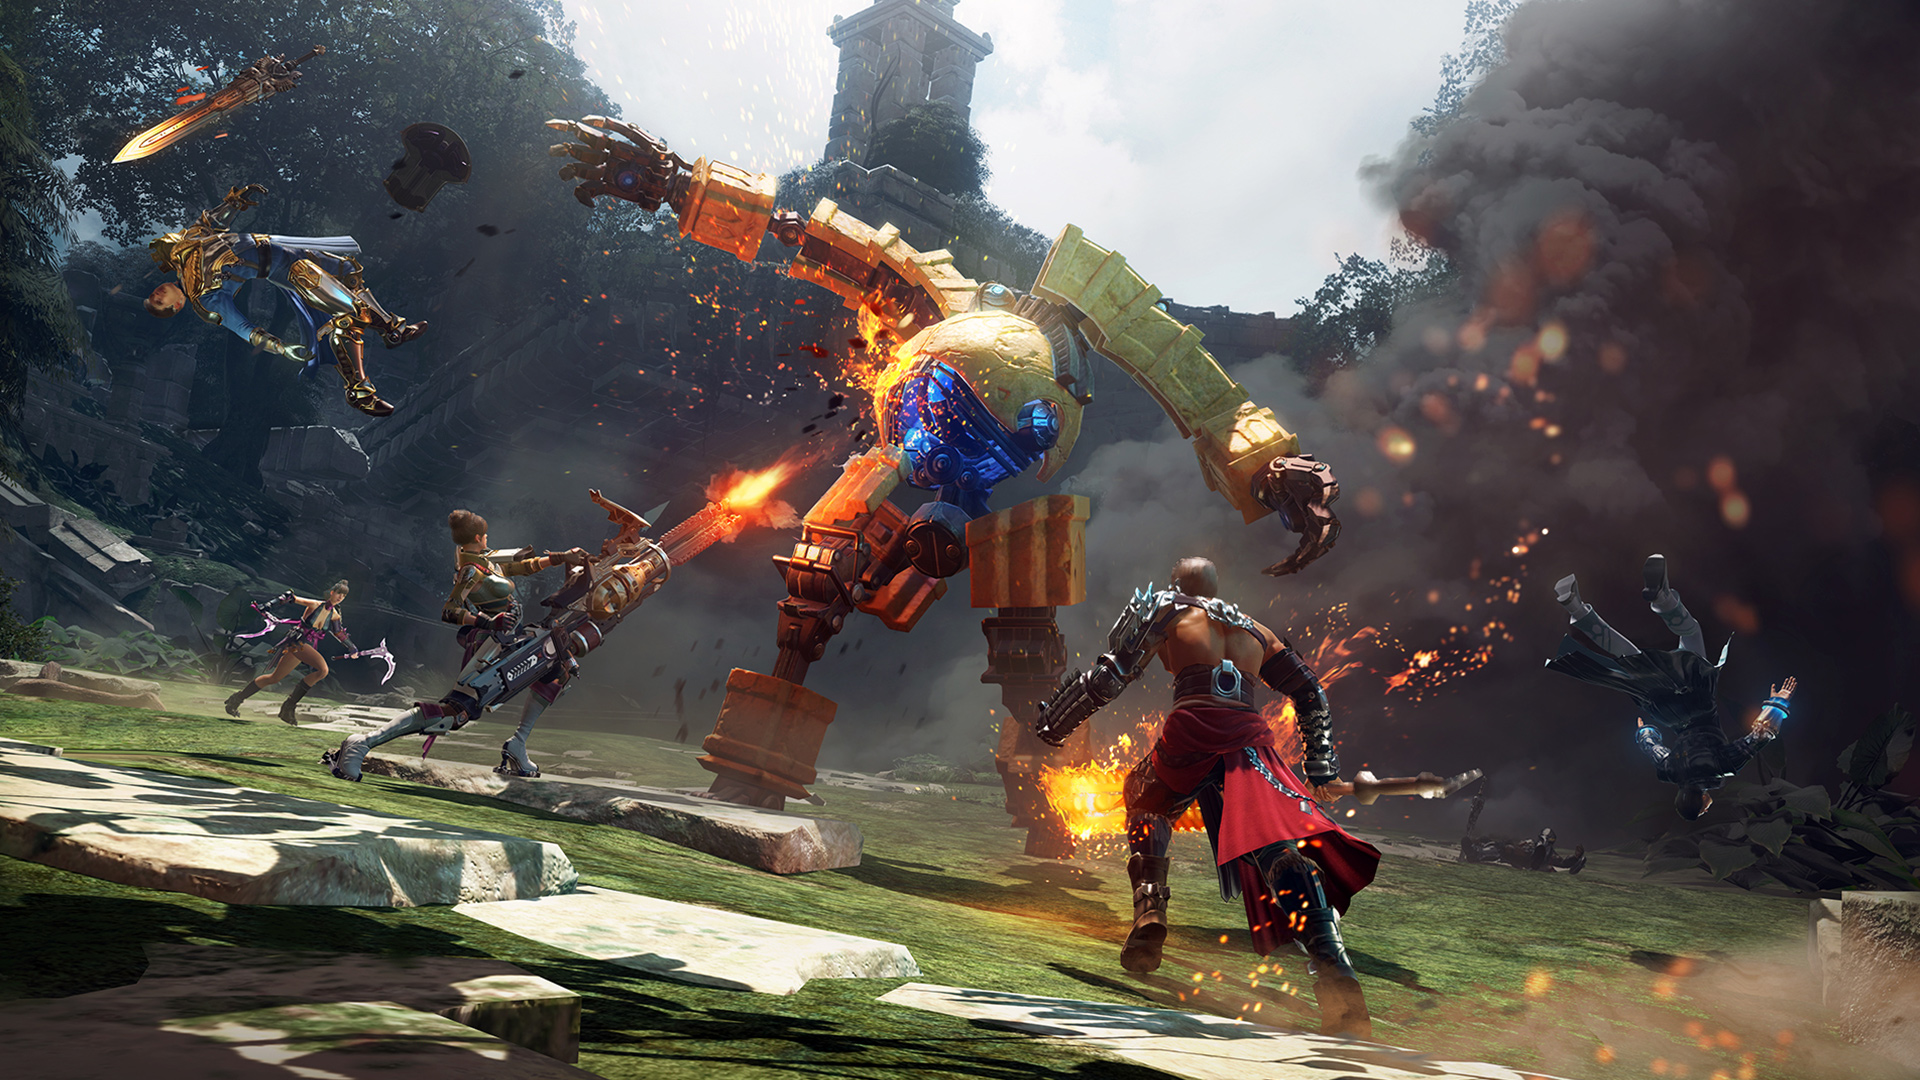 free download skyforge official site